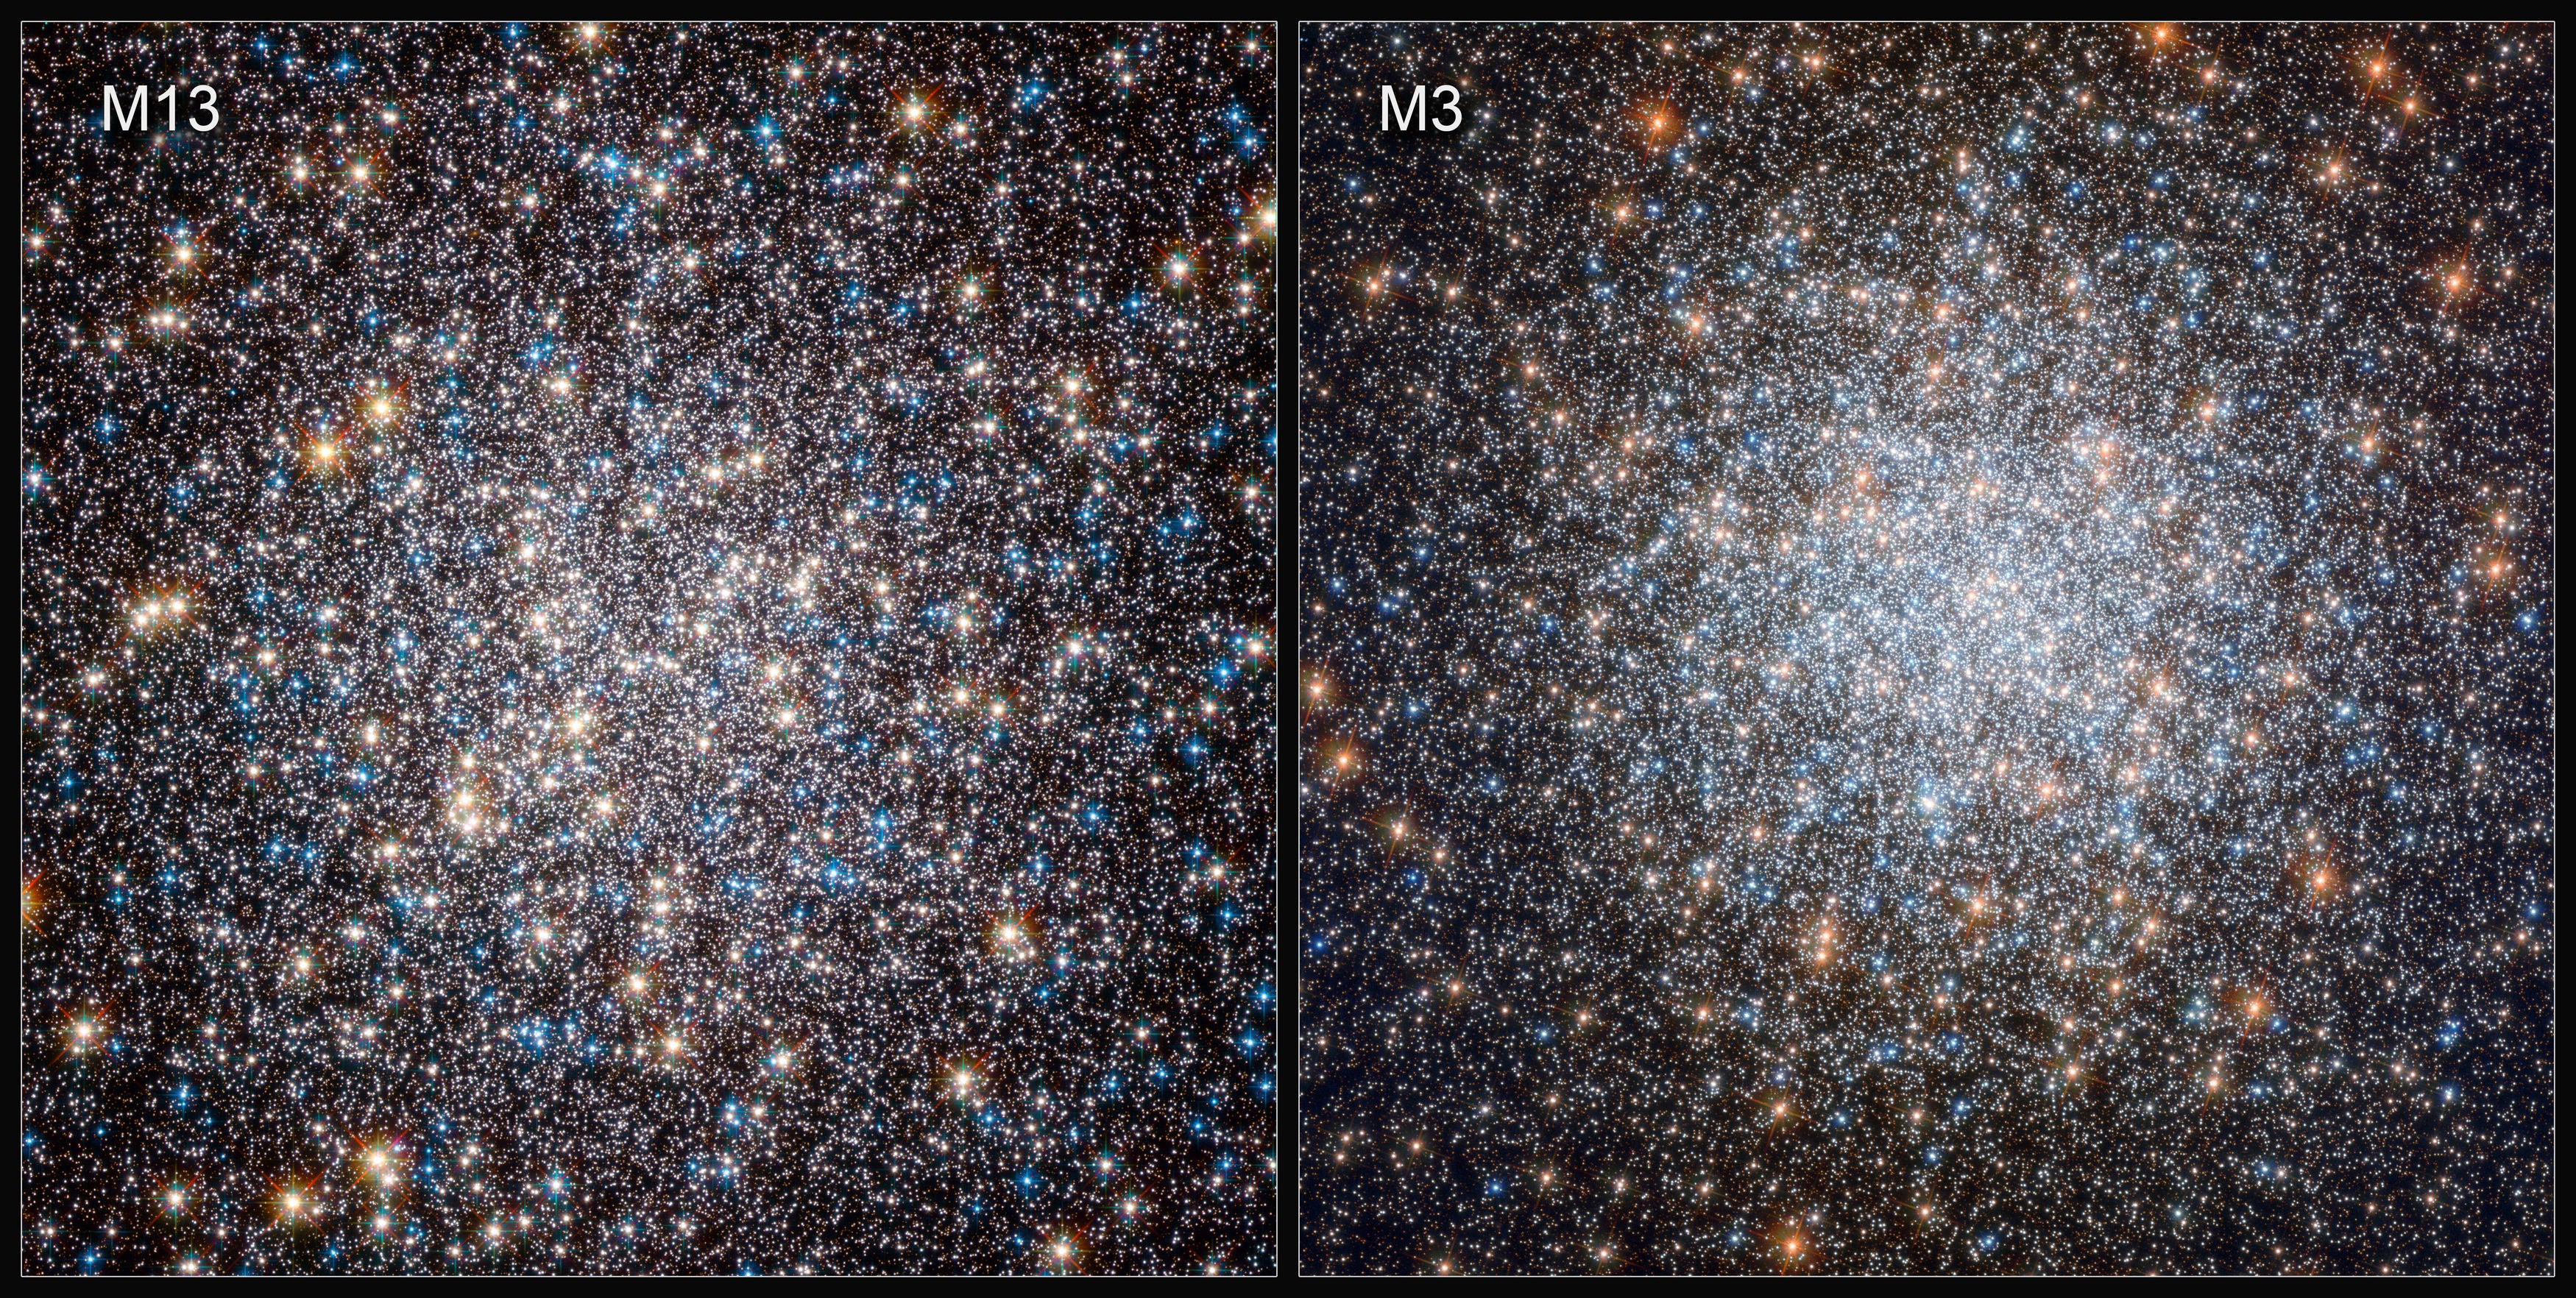 Scientists at the University of Bologna compared white dwarfs in the M3 and M13 star clusters, discovering that some were able to slow their rate of cooling by holding on to an outer layer of hydrogen